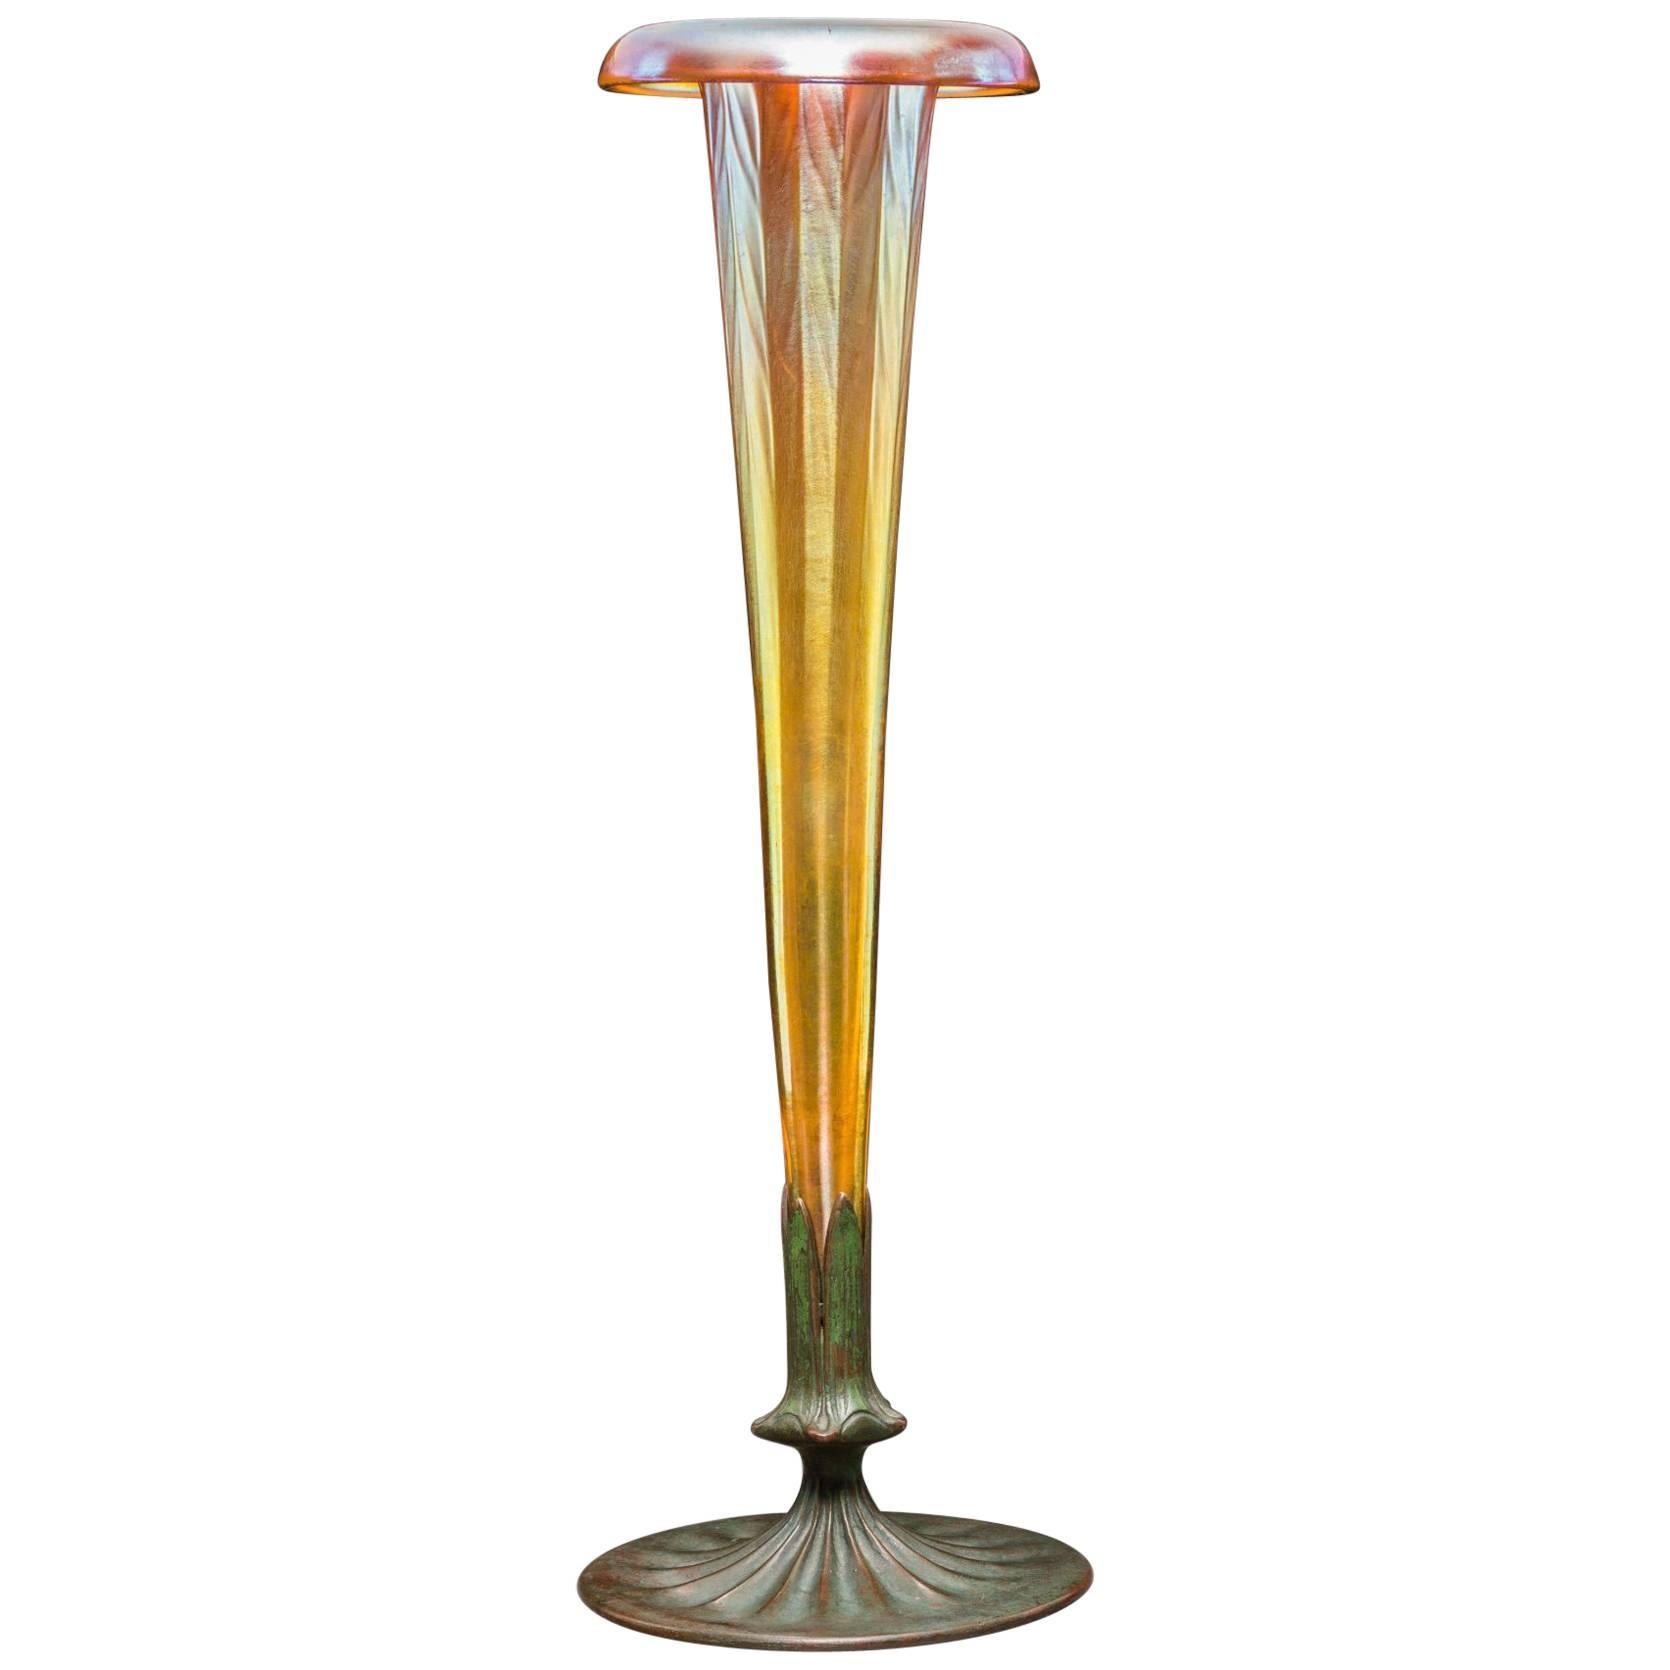 Tall Tiffany Studios Furnaces Favrile and Bronze Trumpet Vase, 1920